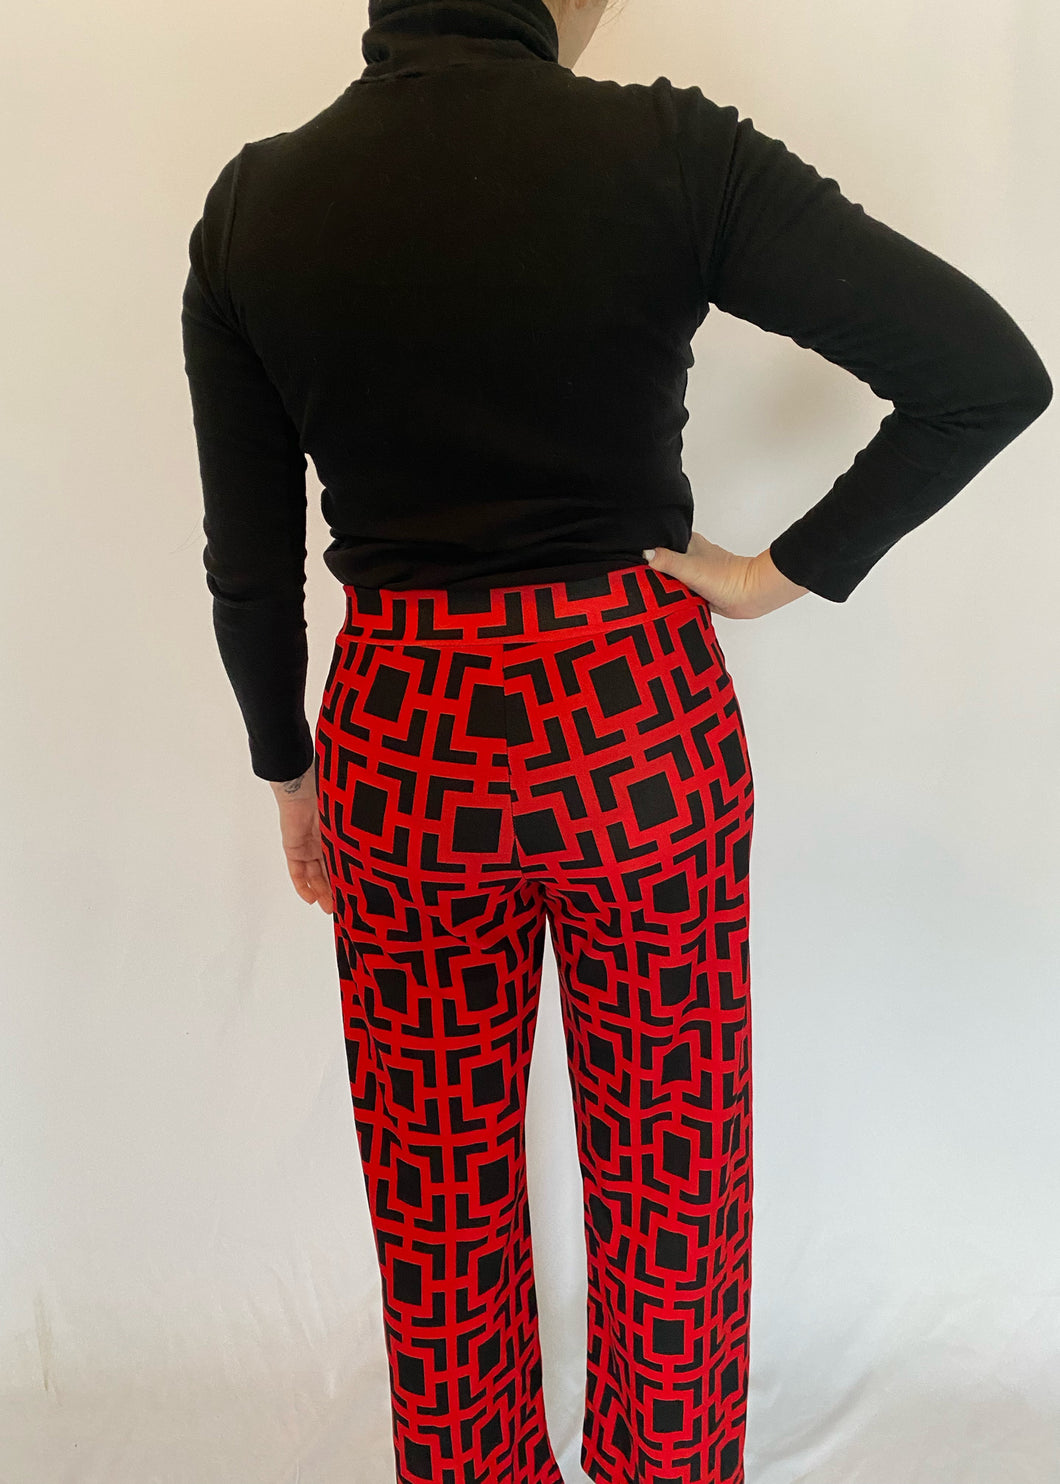 Black and Red 90's Flares